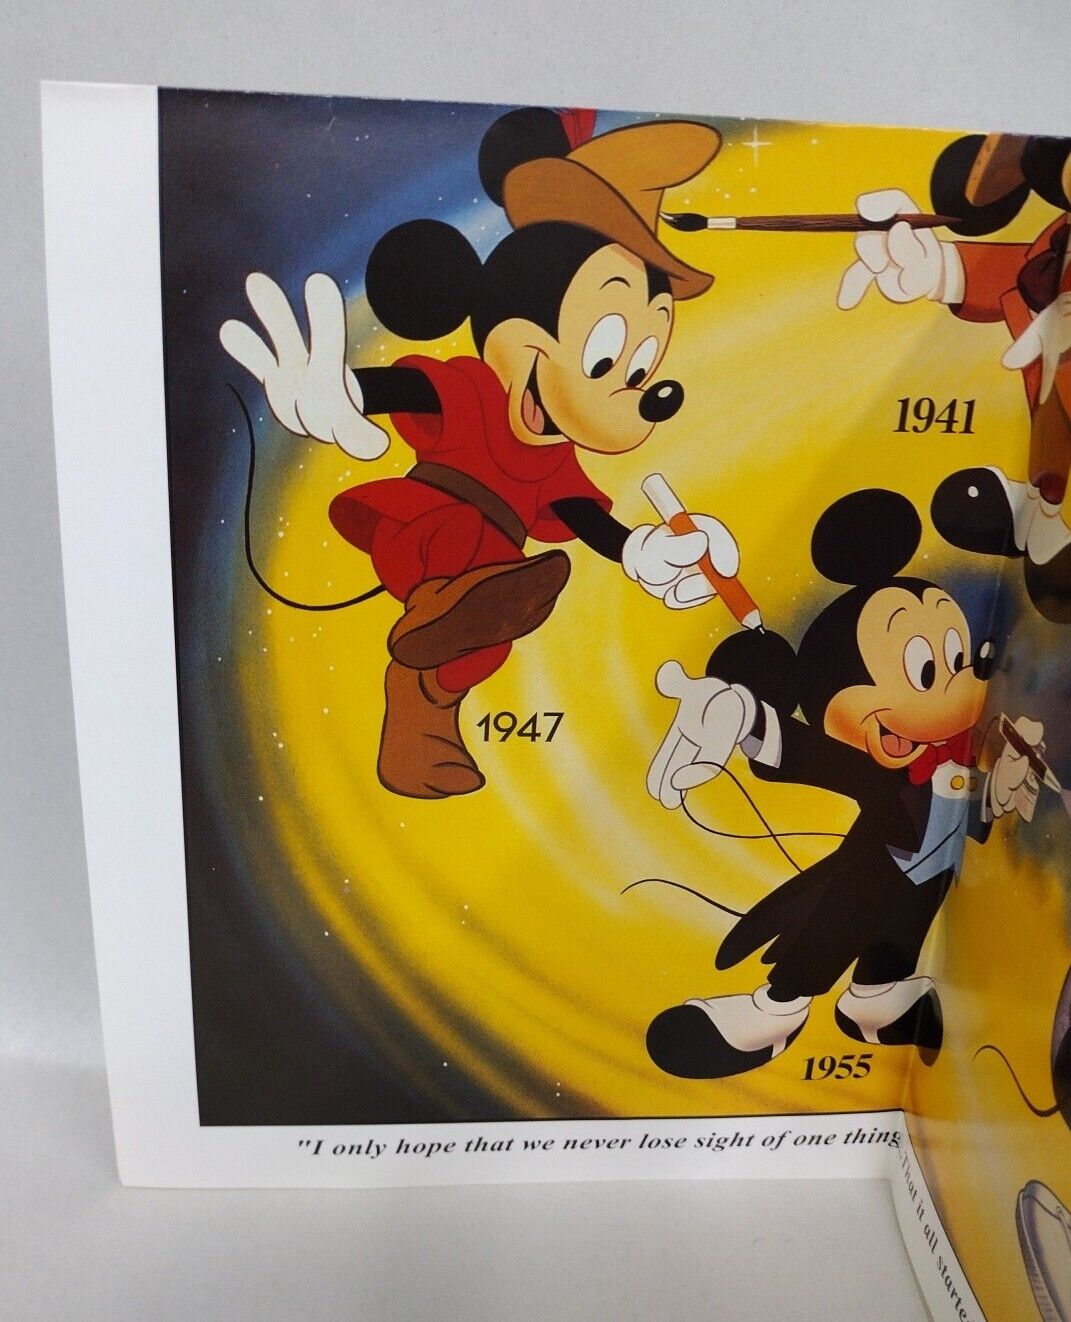 Vintage Disney Mickey Mouse Generations Through the Years Poster #88002 16"x20"